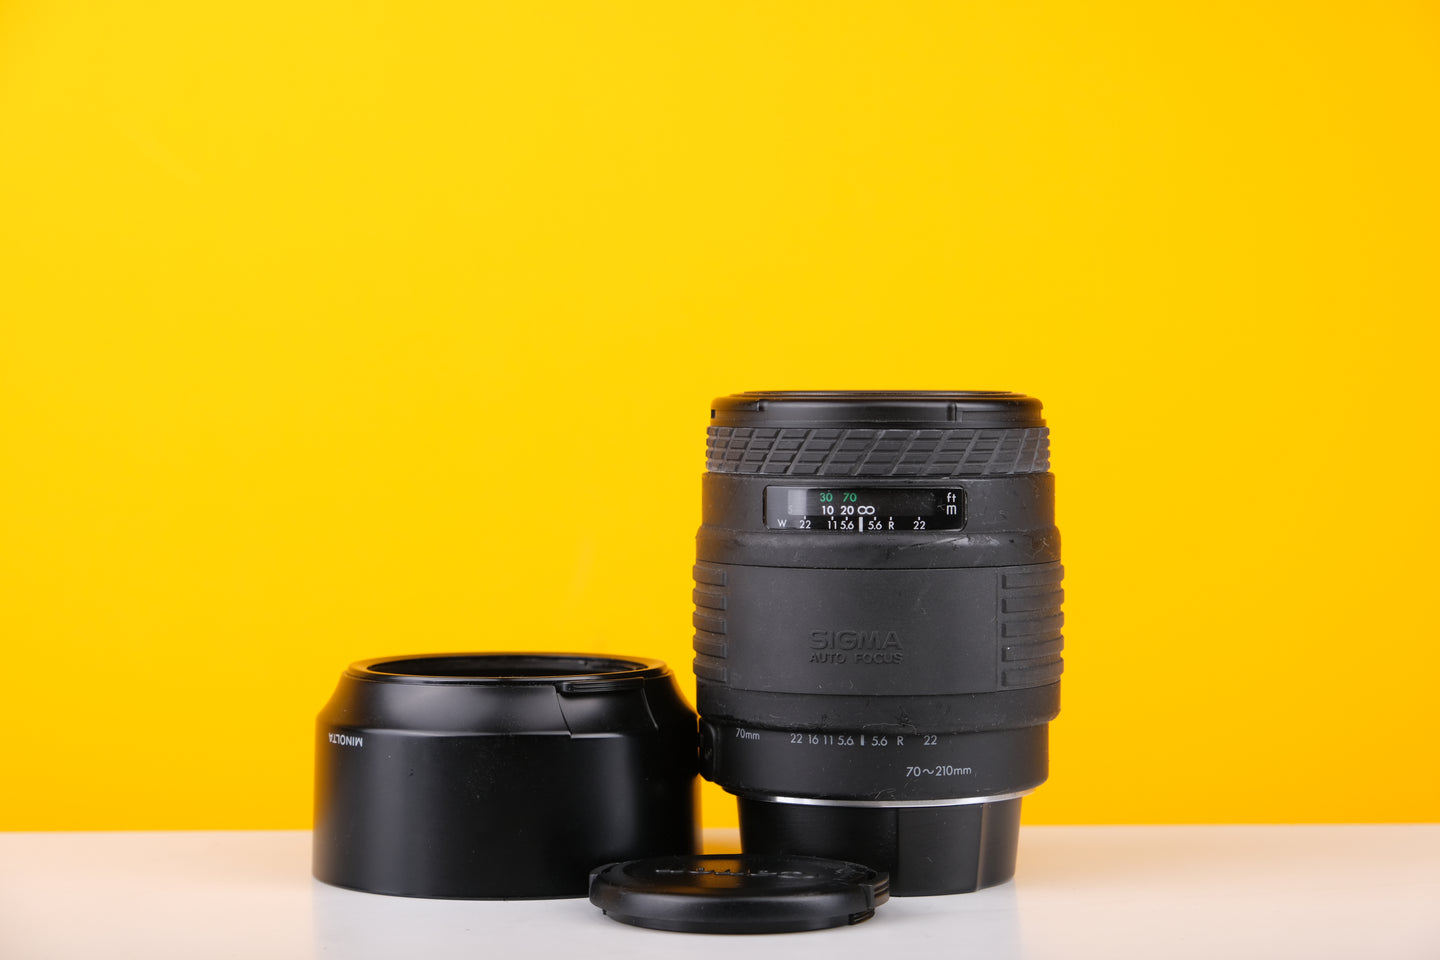 Sigma 70-210mm f4-5.6 Lens for Canon